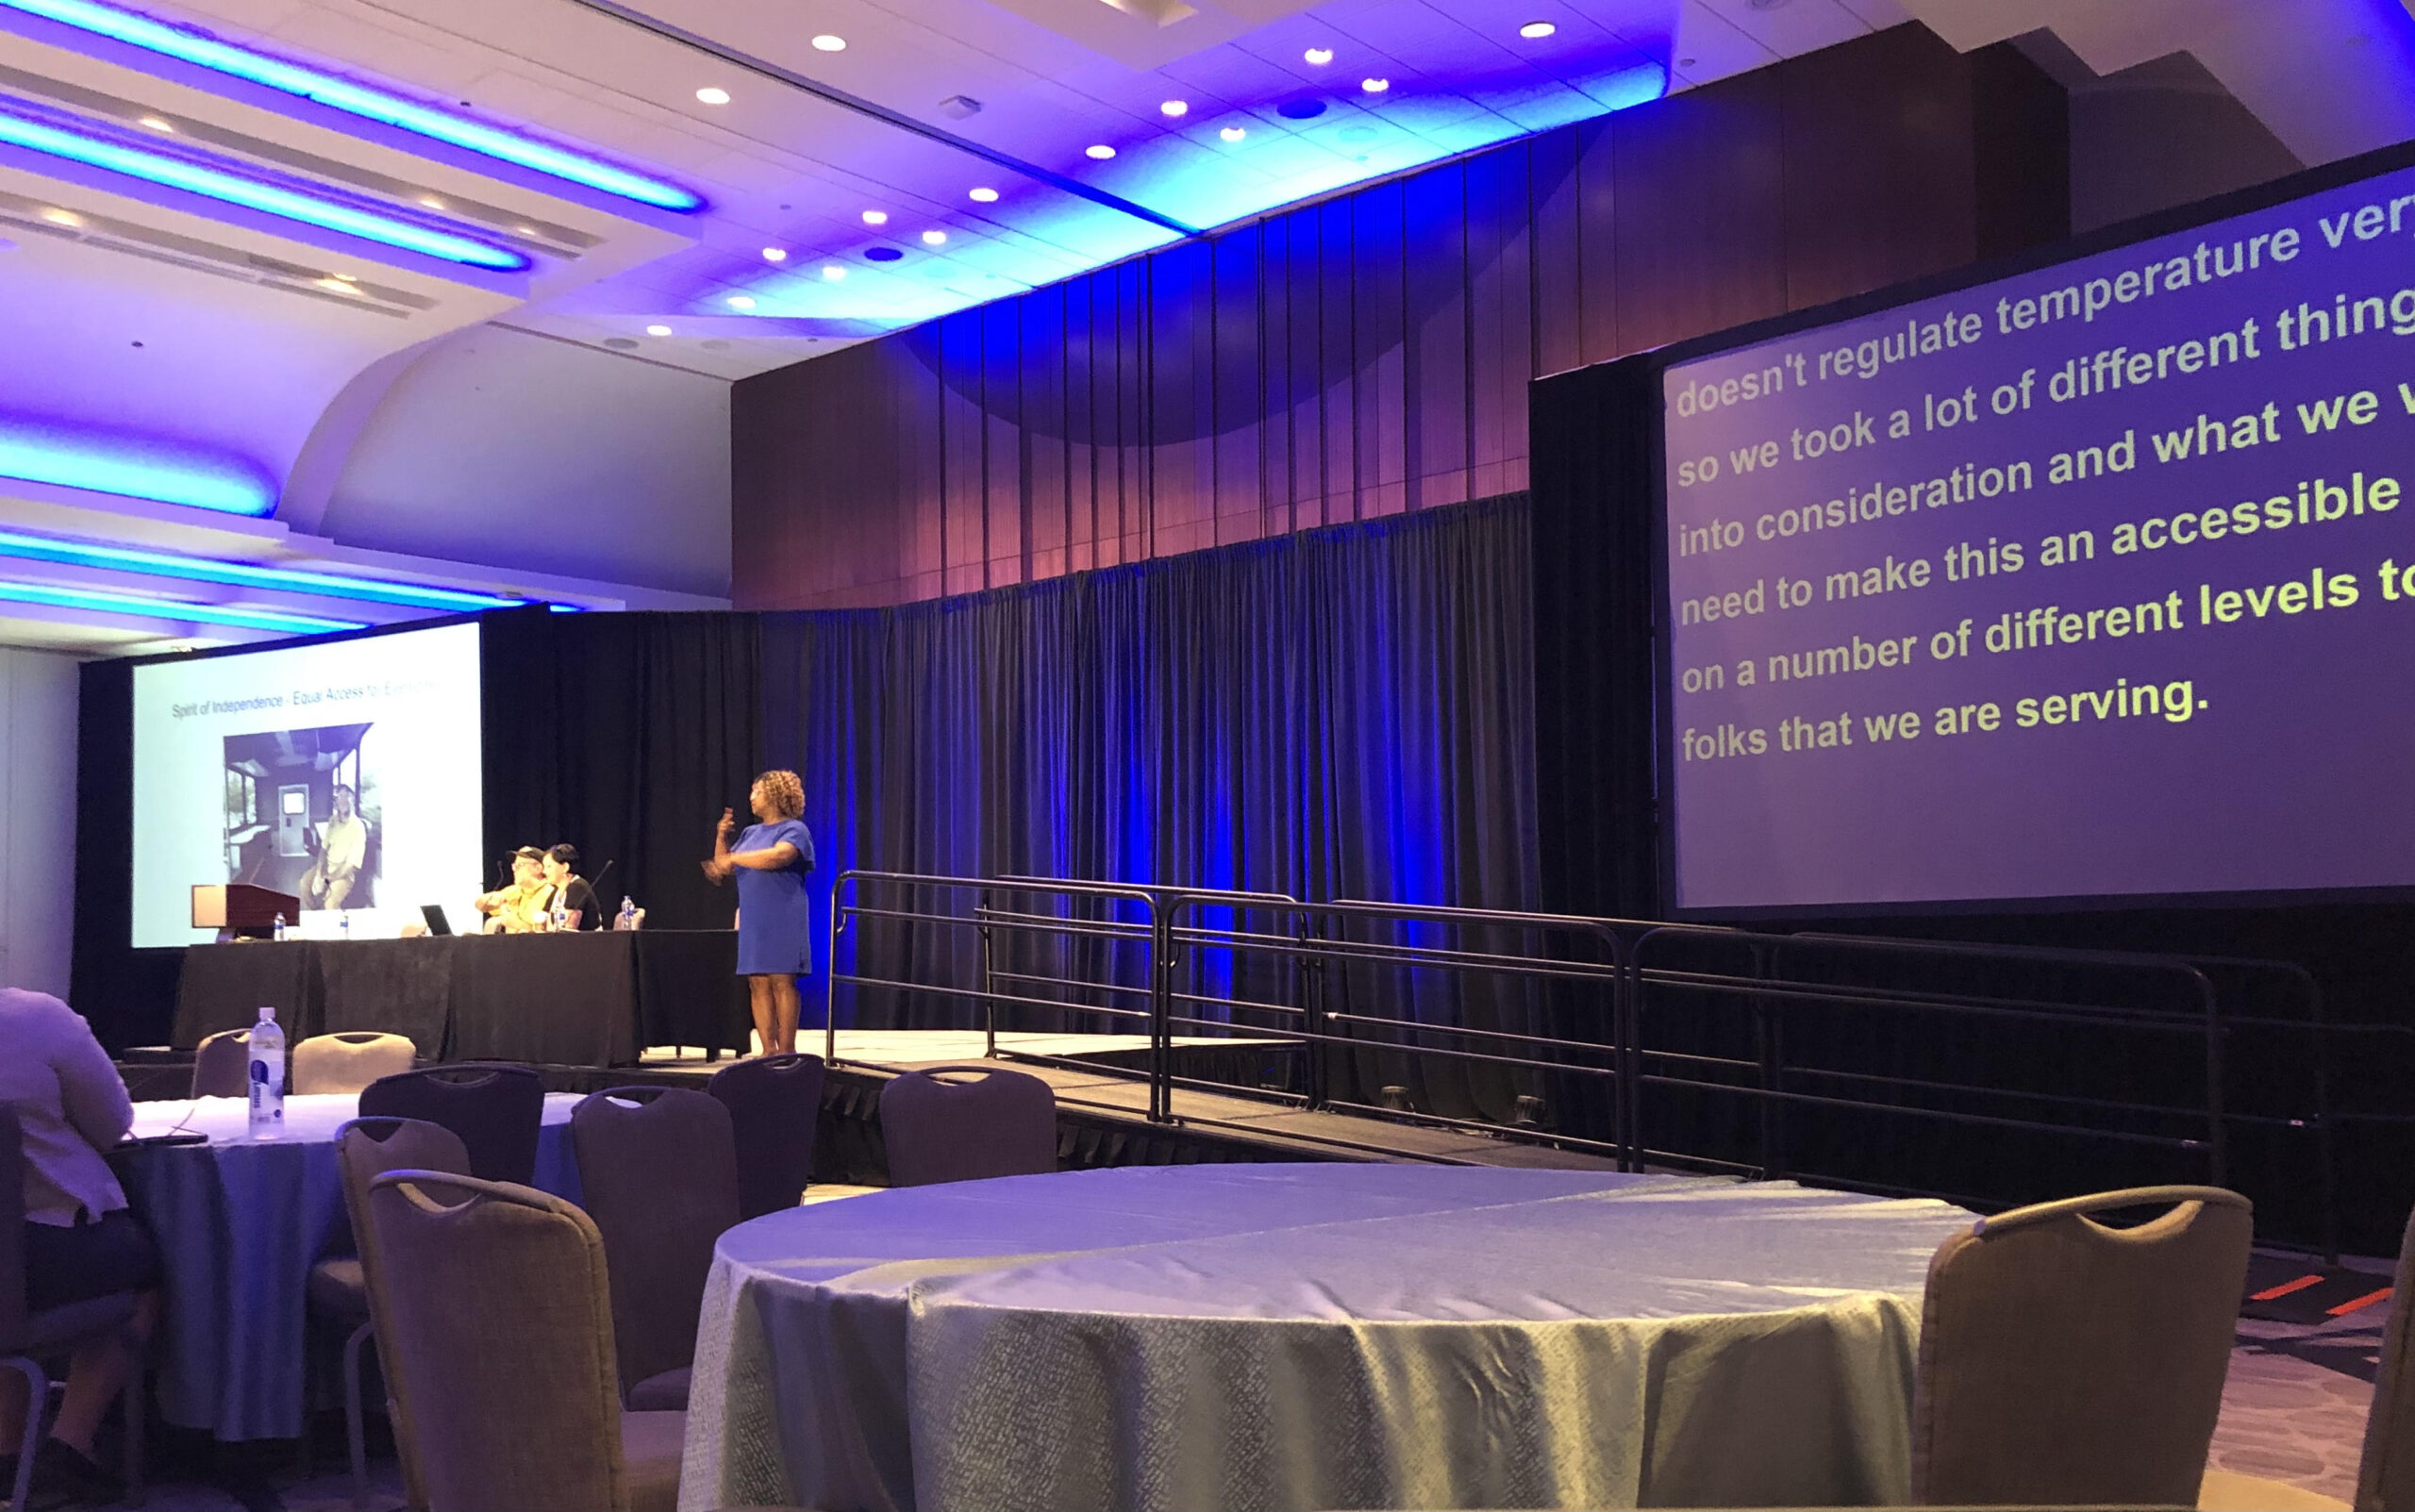 Picture of a hotel ballroom stage shown, with a large screen of PowerPoint on the left, a large screen of CART captions on the right, and an ASL interpreter standing in the middle of the stage.